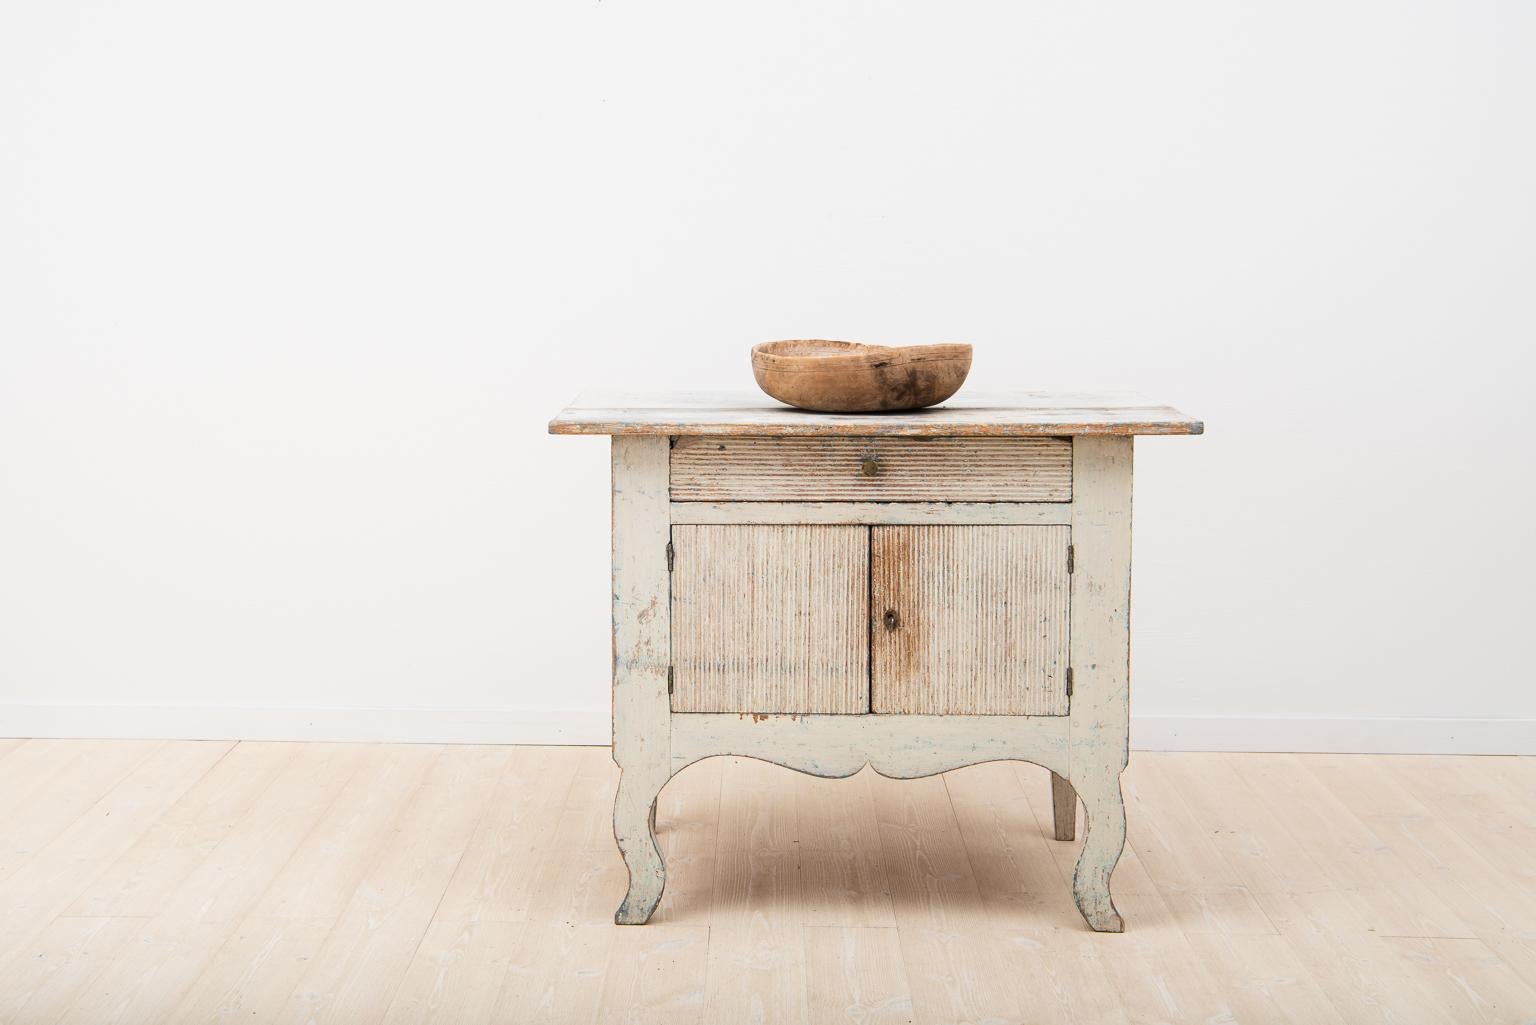 Unusually small Swedish sideboard from the transition period between the Rococo and Gustavian styles. Dry scraped to the light 18th century original paint. Minor loss of material around the drawer’s corners and edges. Tabletop with some wear, Järvsö